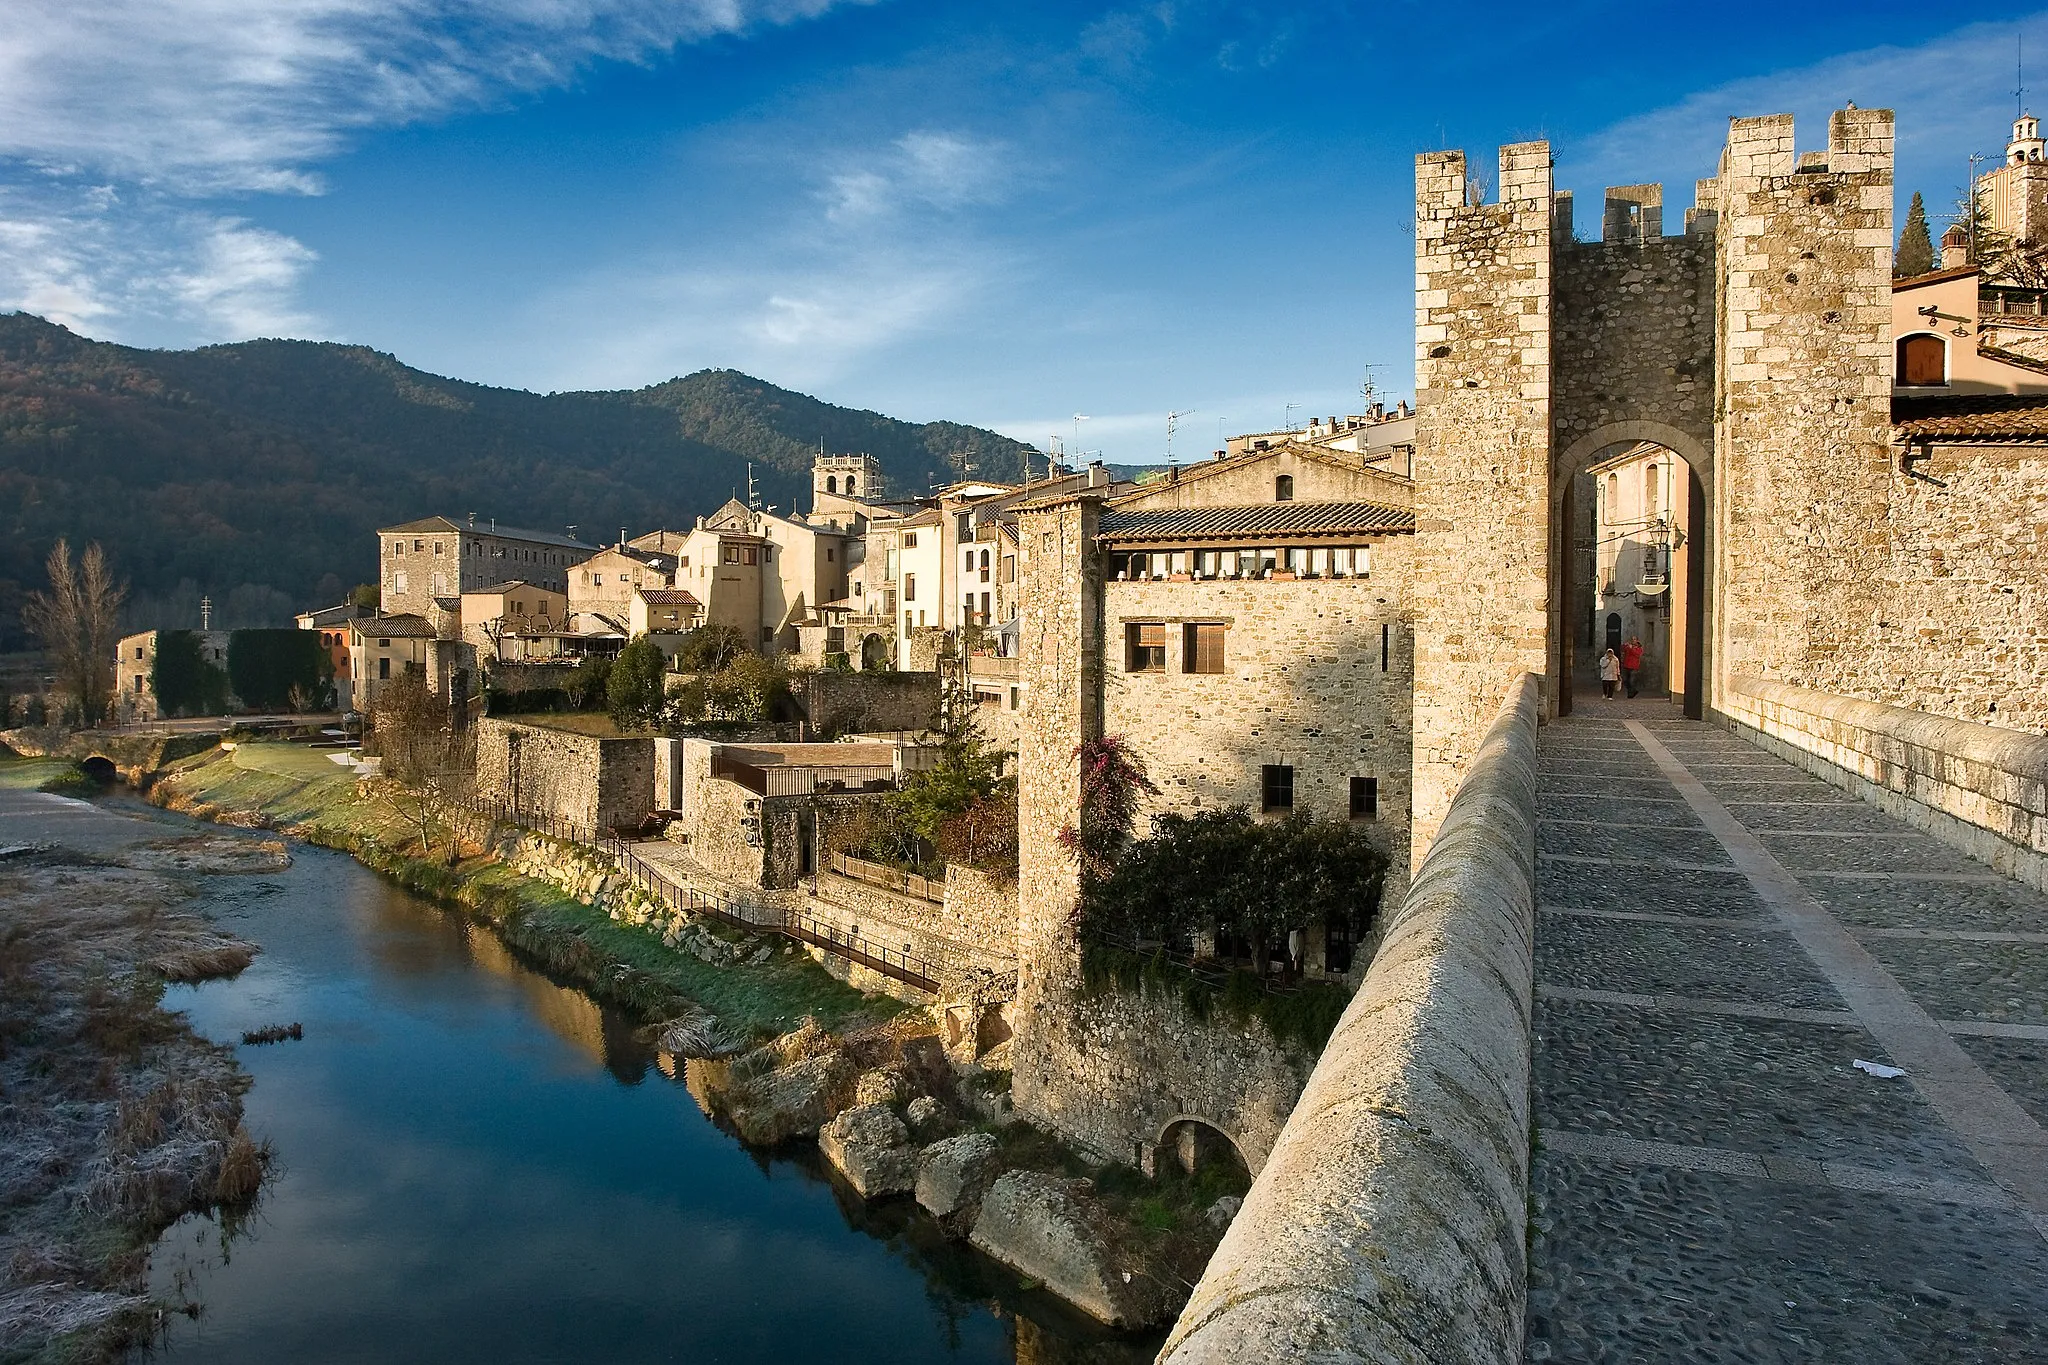 Photo showing: View of the historic complex of Besalú, a fortified medieval village with access by its famous Romanesque bridge shown in the foreground